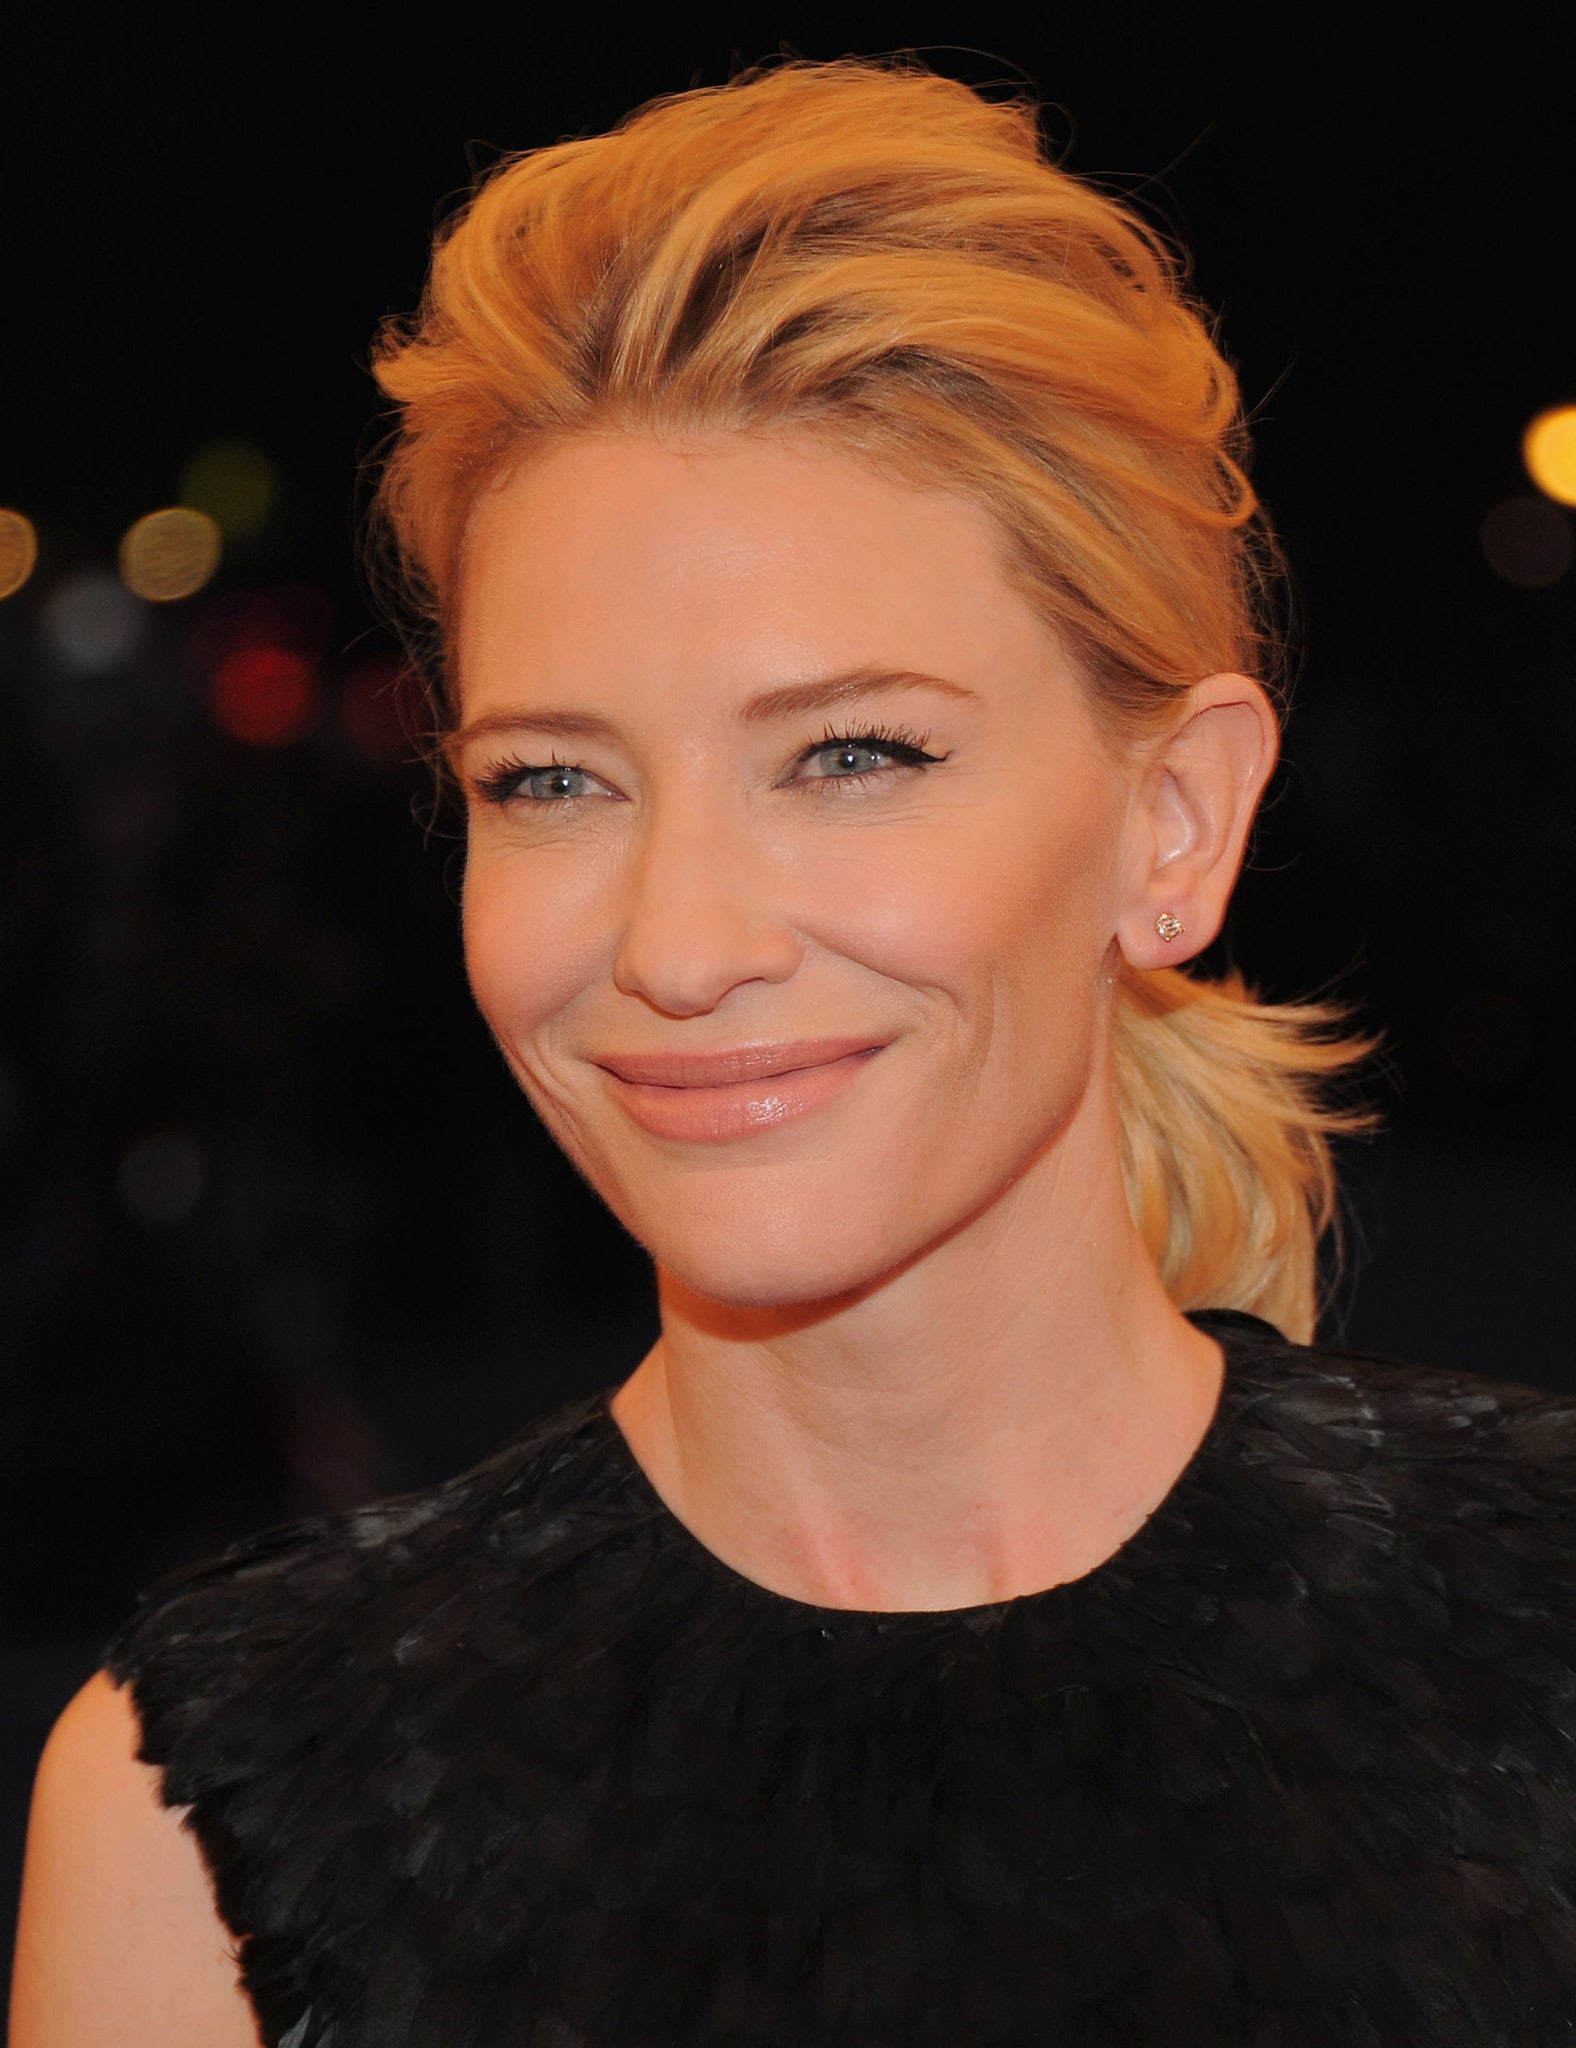 Cate Blanchett will be at the London premiere of Blue Jasmine tonight